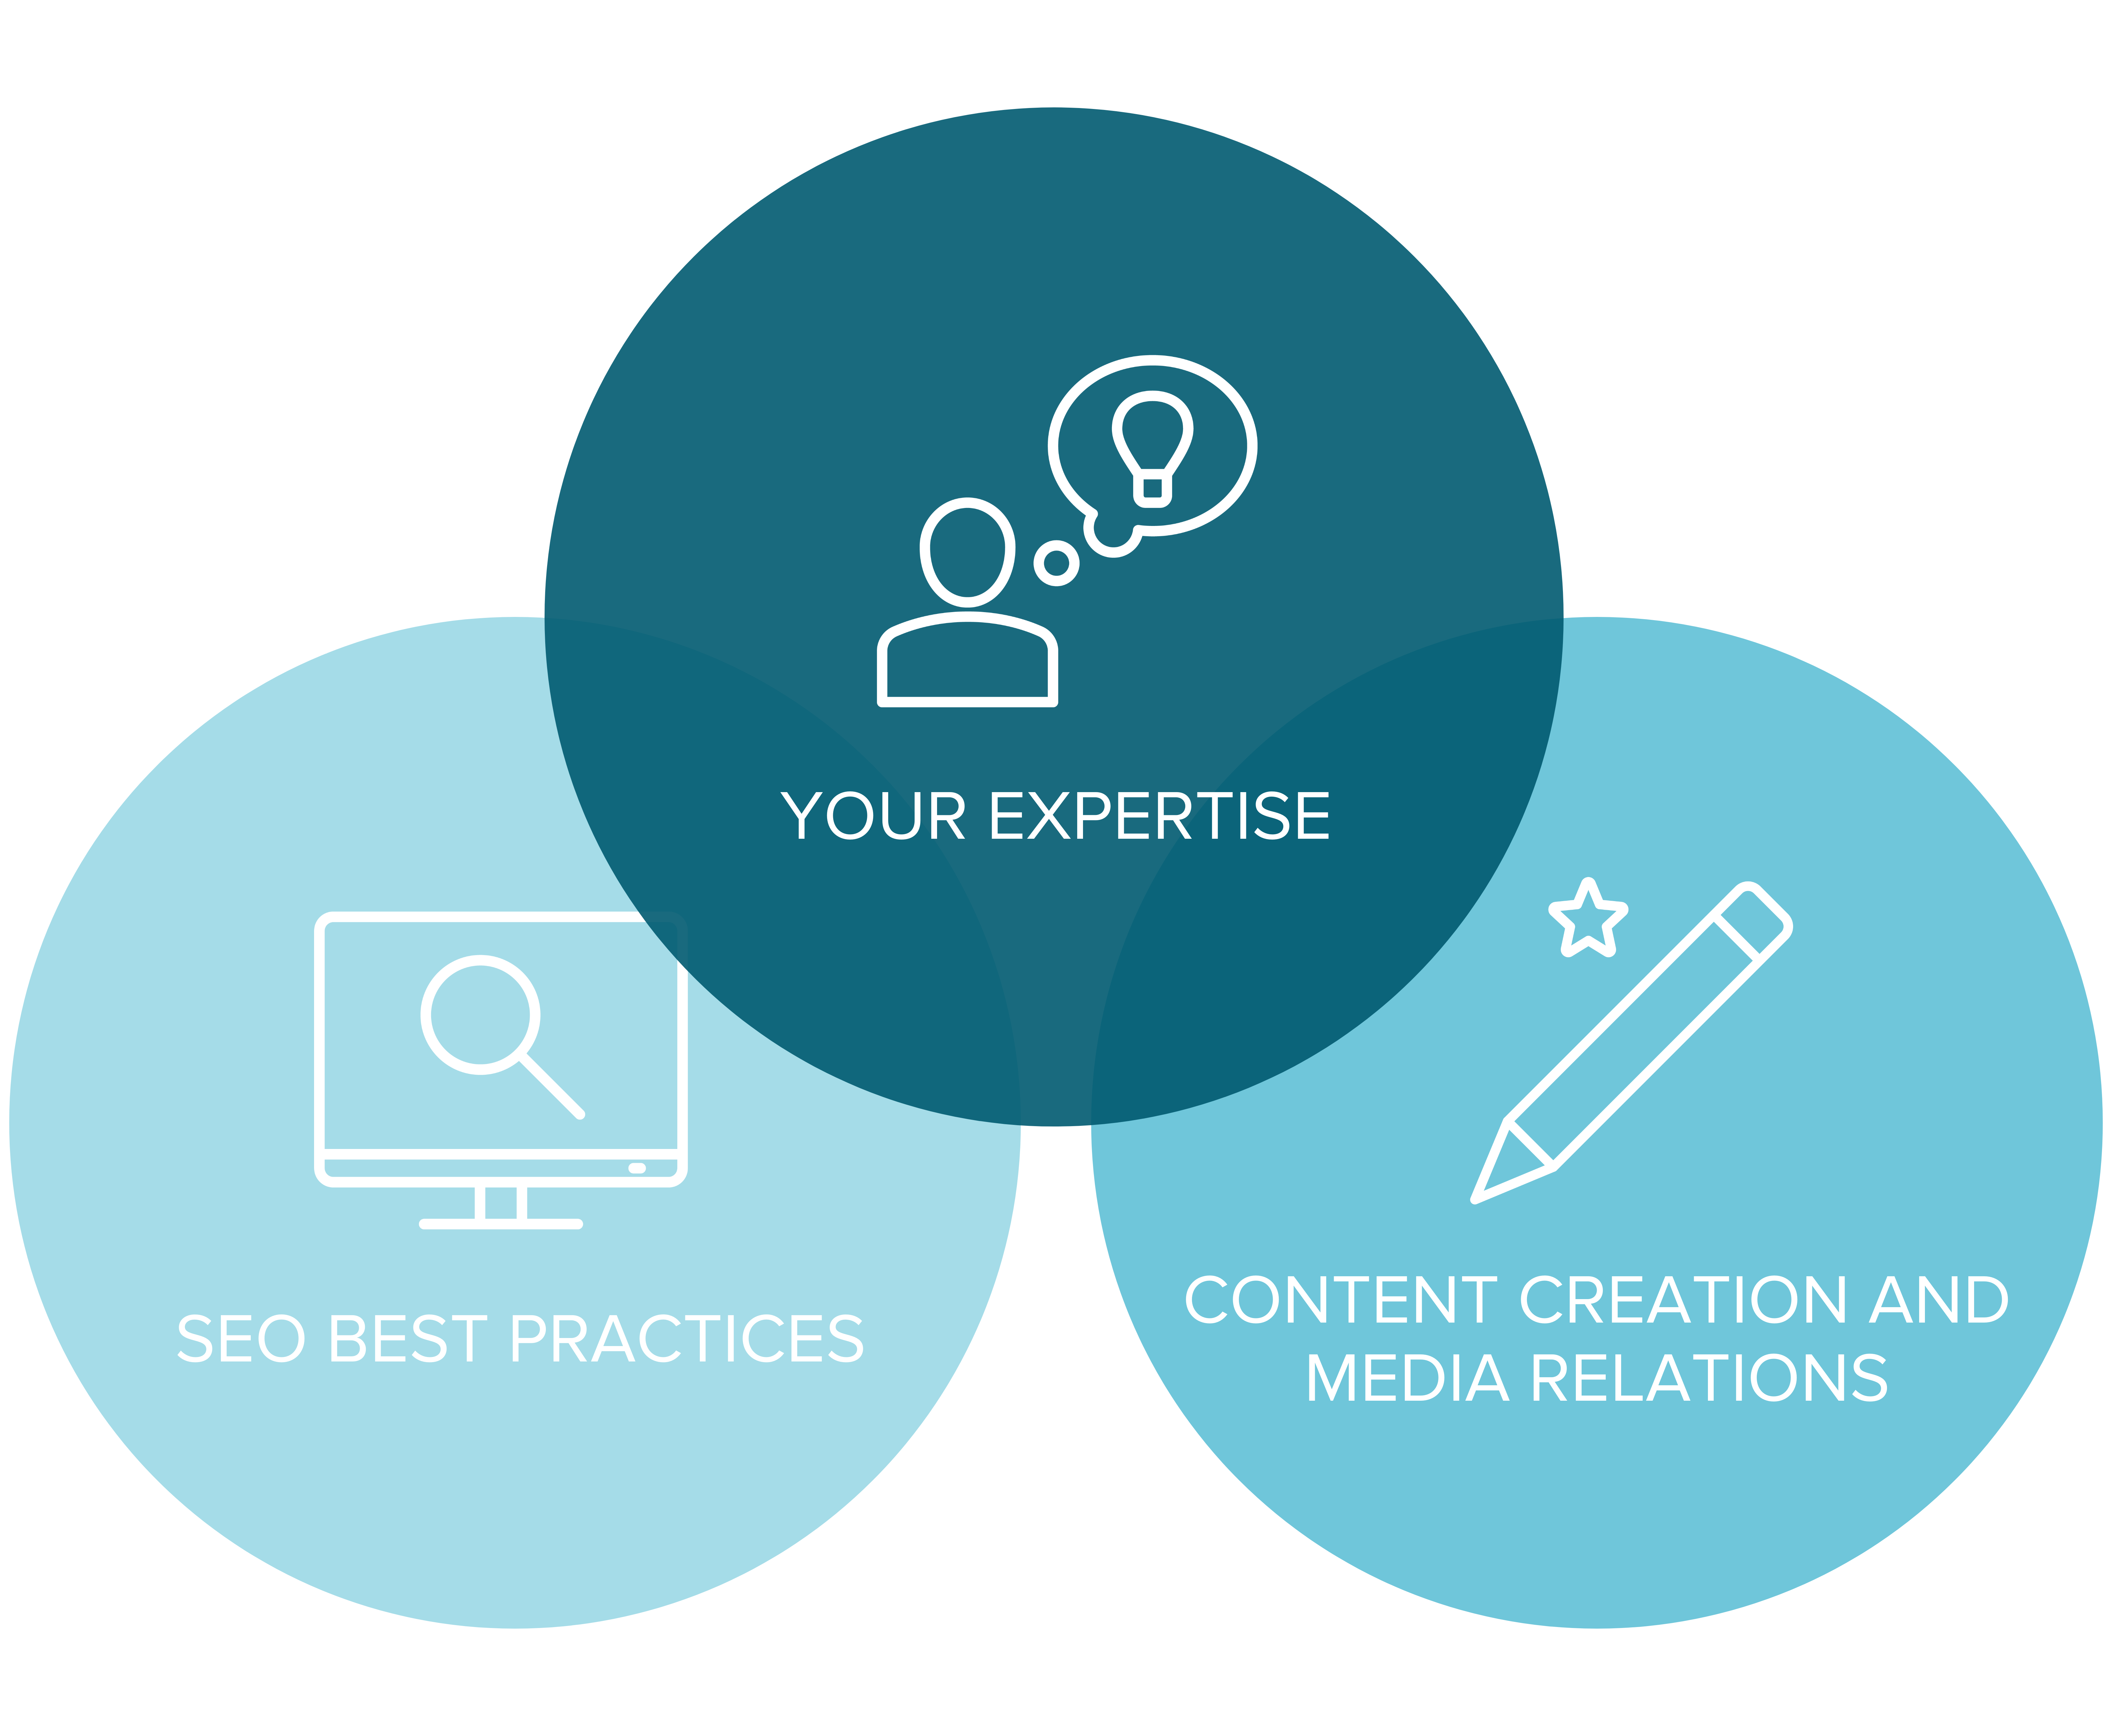 Blue Venn diagram. The top circle says, "Your expertise," and includes a white outline of a person thinking; the thinking bubble has a light bulb in it. The second circle says, "SEO best practices," and includes a white outline of a computer with a magnifying glass on the screen. The third circle says, "Content creation and media relations," and includes a white outline of a pencil and a star.